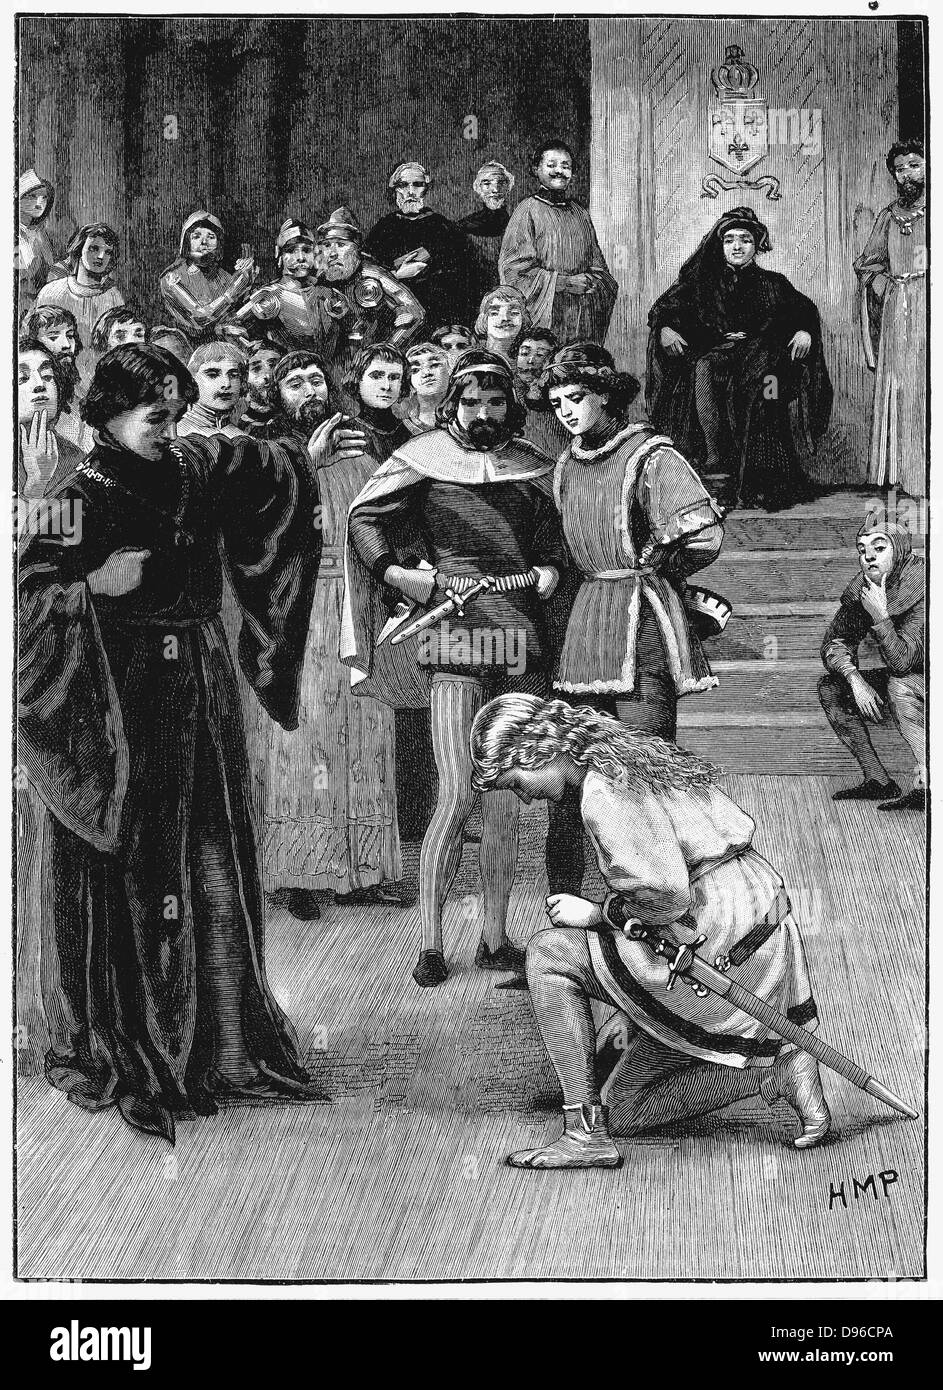 Joan of Arc (c1412-31) St Joan, St Jeanne d'Arc, the Maid of Orleans. French patriot and martyr. Joan before Charles VII at Chinon, 1429. Wood engraving c1880 Stock Photo